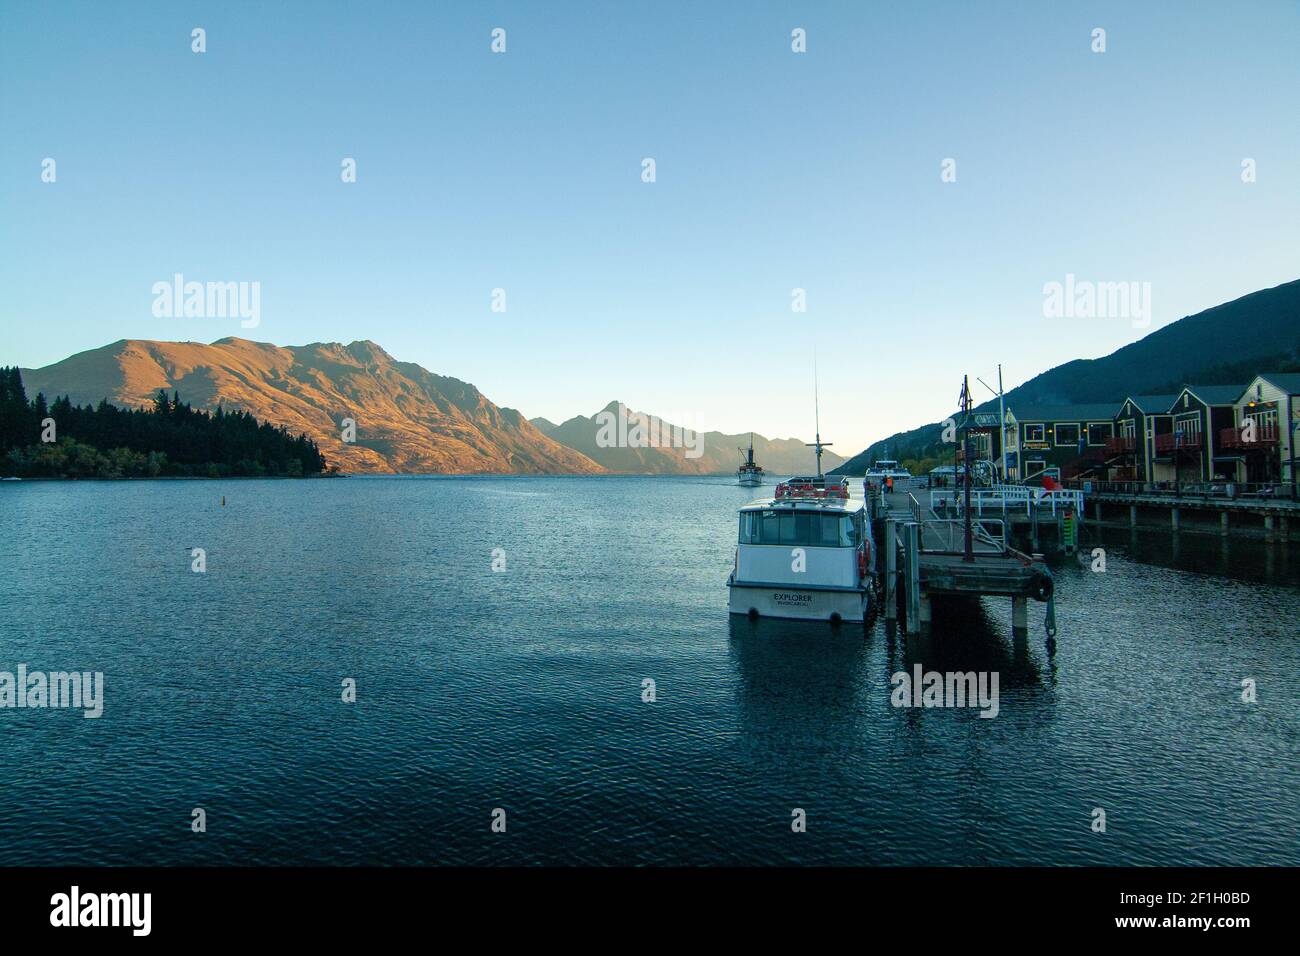 Queenstown Wharf and Harbour View of Lake Wakatipu and Mountain Peaks at Sunset Lights on background, New Zealand, South Island Banque D'Images